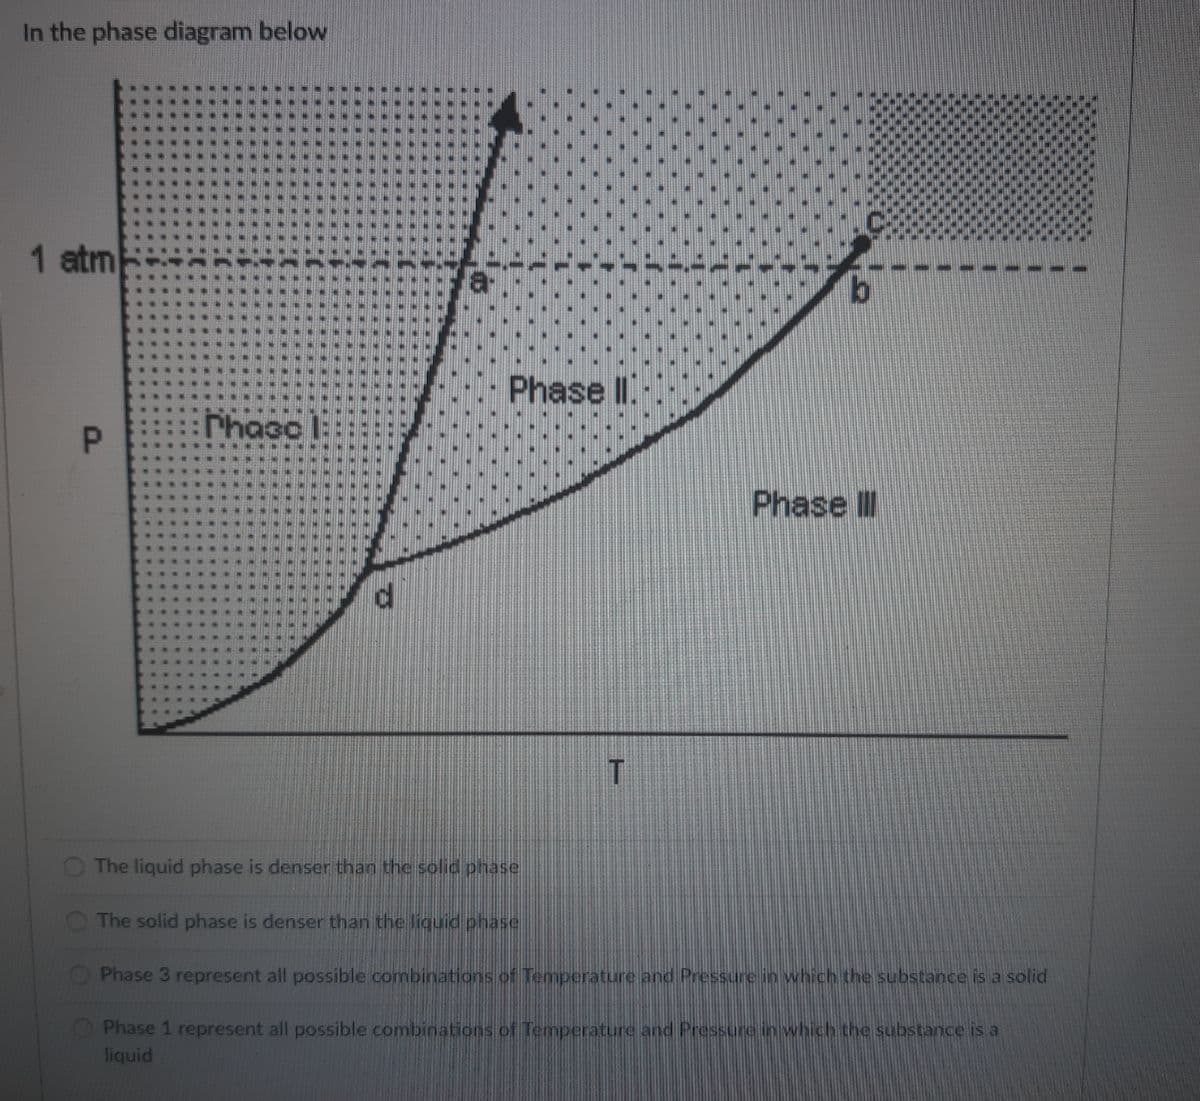 In the phase diagram below
1 atm
Phase II.
Phaoo
......
.... ..
Phase I
...
--- ..
The liquid phase is denser than the solid phase
The solid phase is denser than the liquid phase
O Phase 3 represent all possible combinations of Temperature and Pressure in which the substance is a solid
OPhase 1 represent all possible combinations of Temperature and Pressure in which the substance is a
liquid
P.
